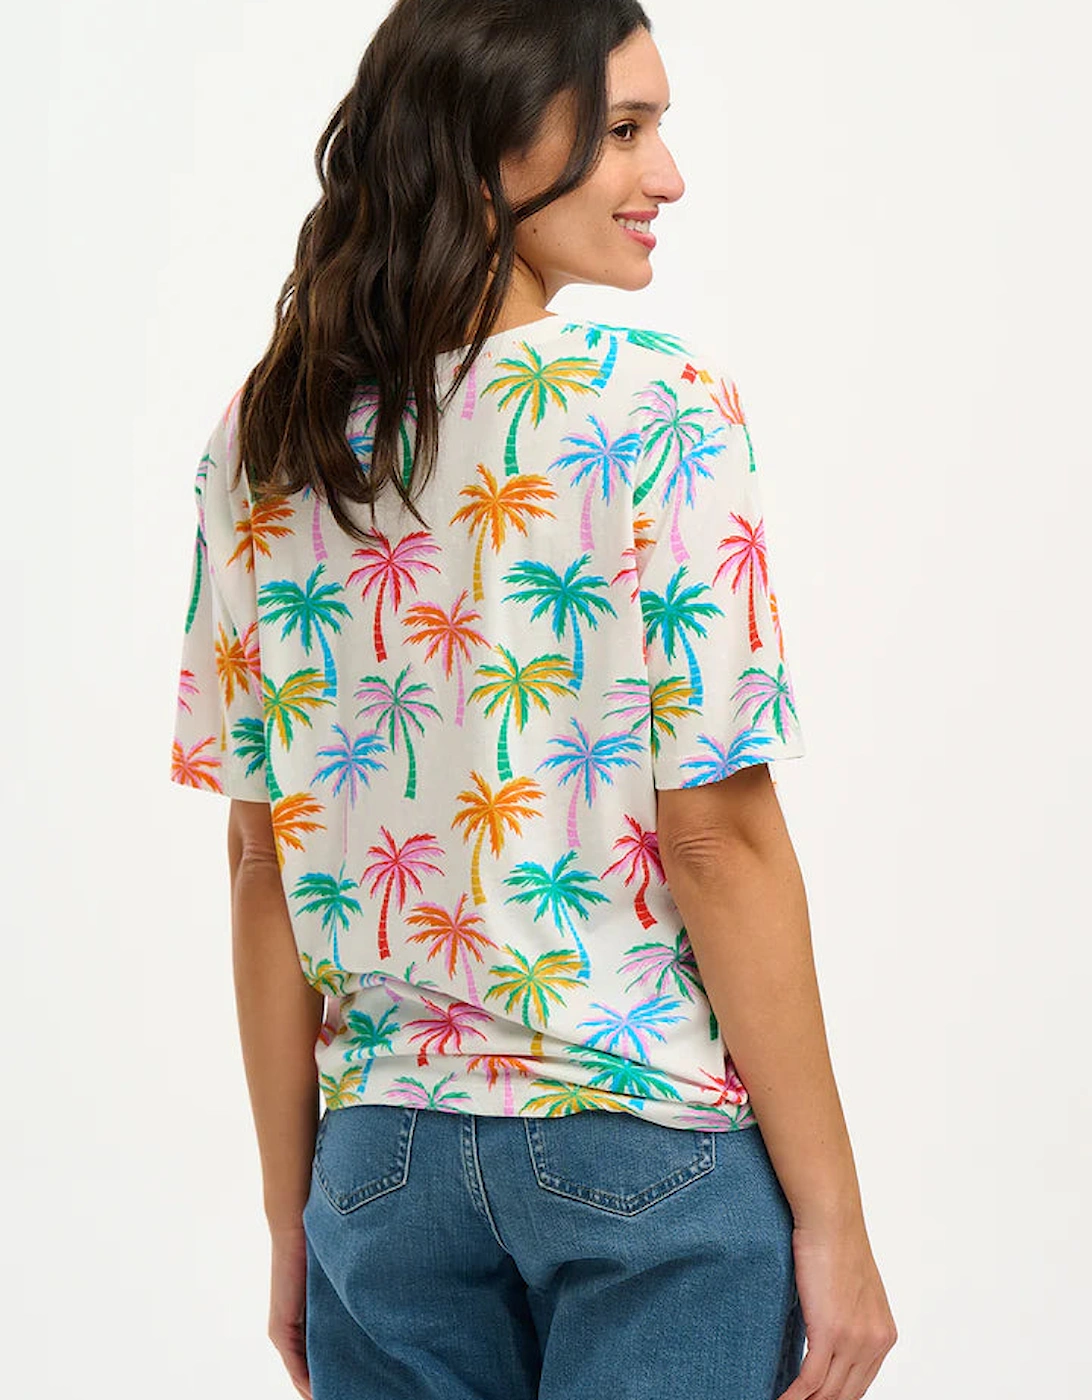 Kinsley relaxed T shirt